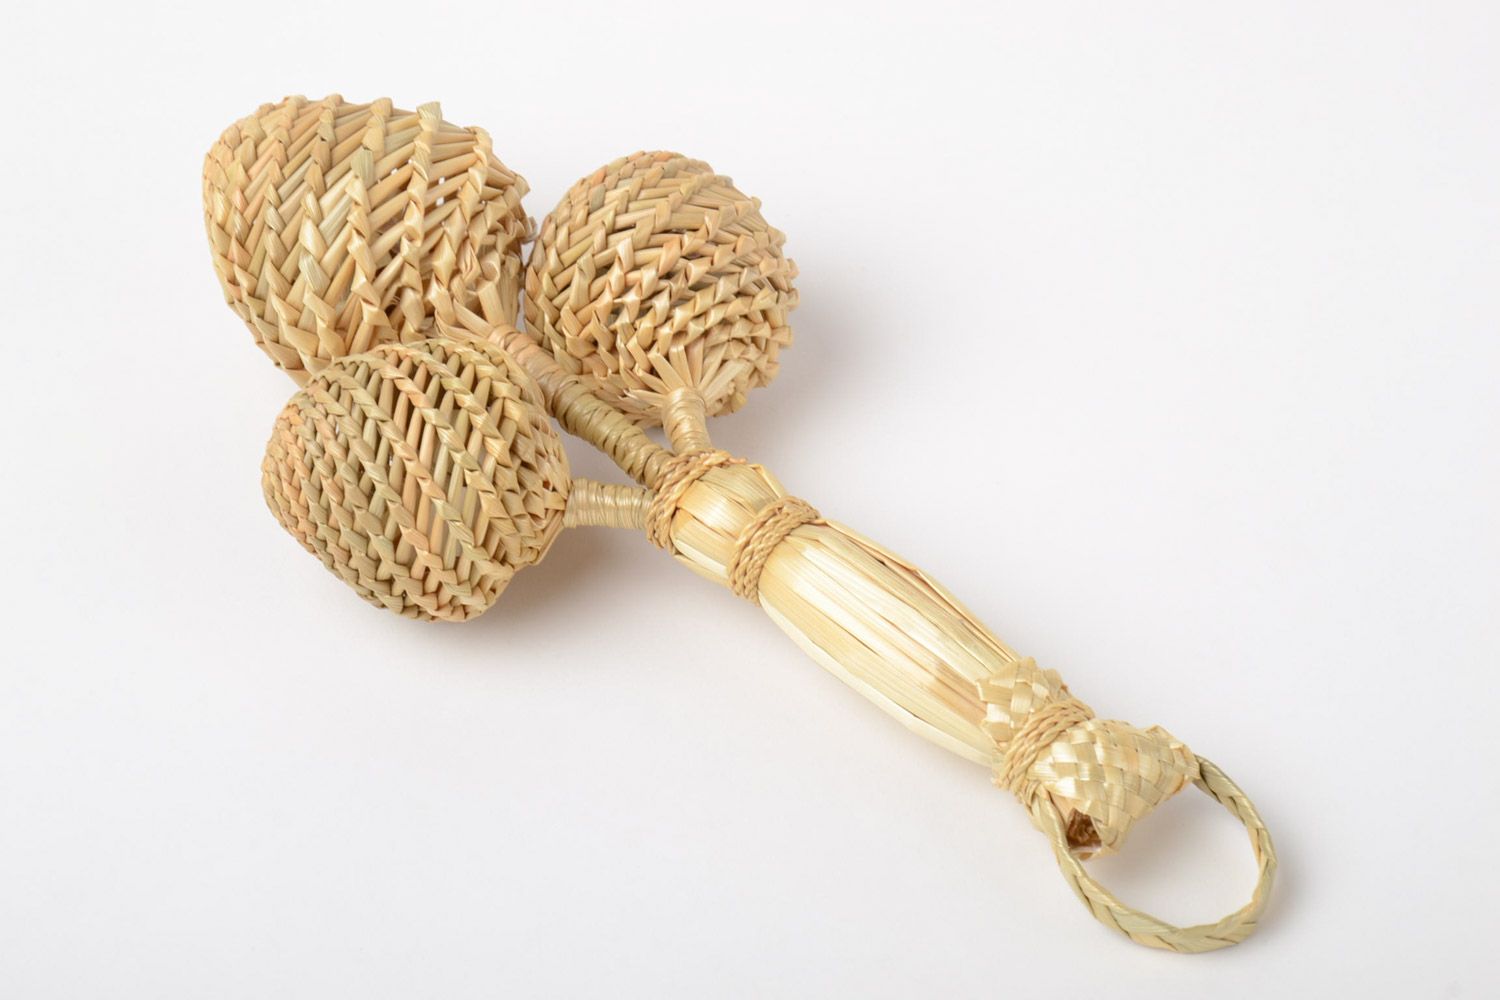 Handmade eco friendly rattle toy woven of natural straw for babies photo 2